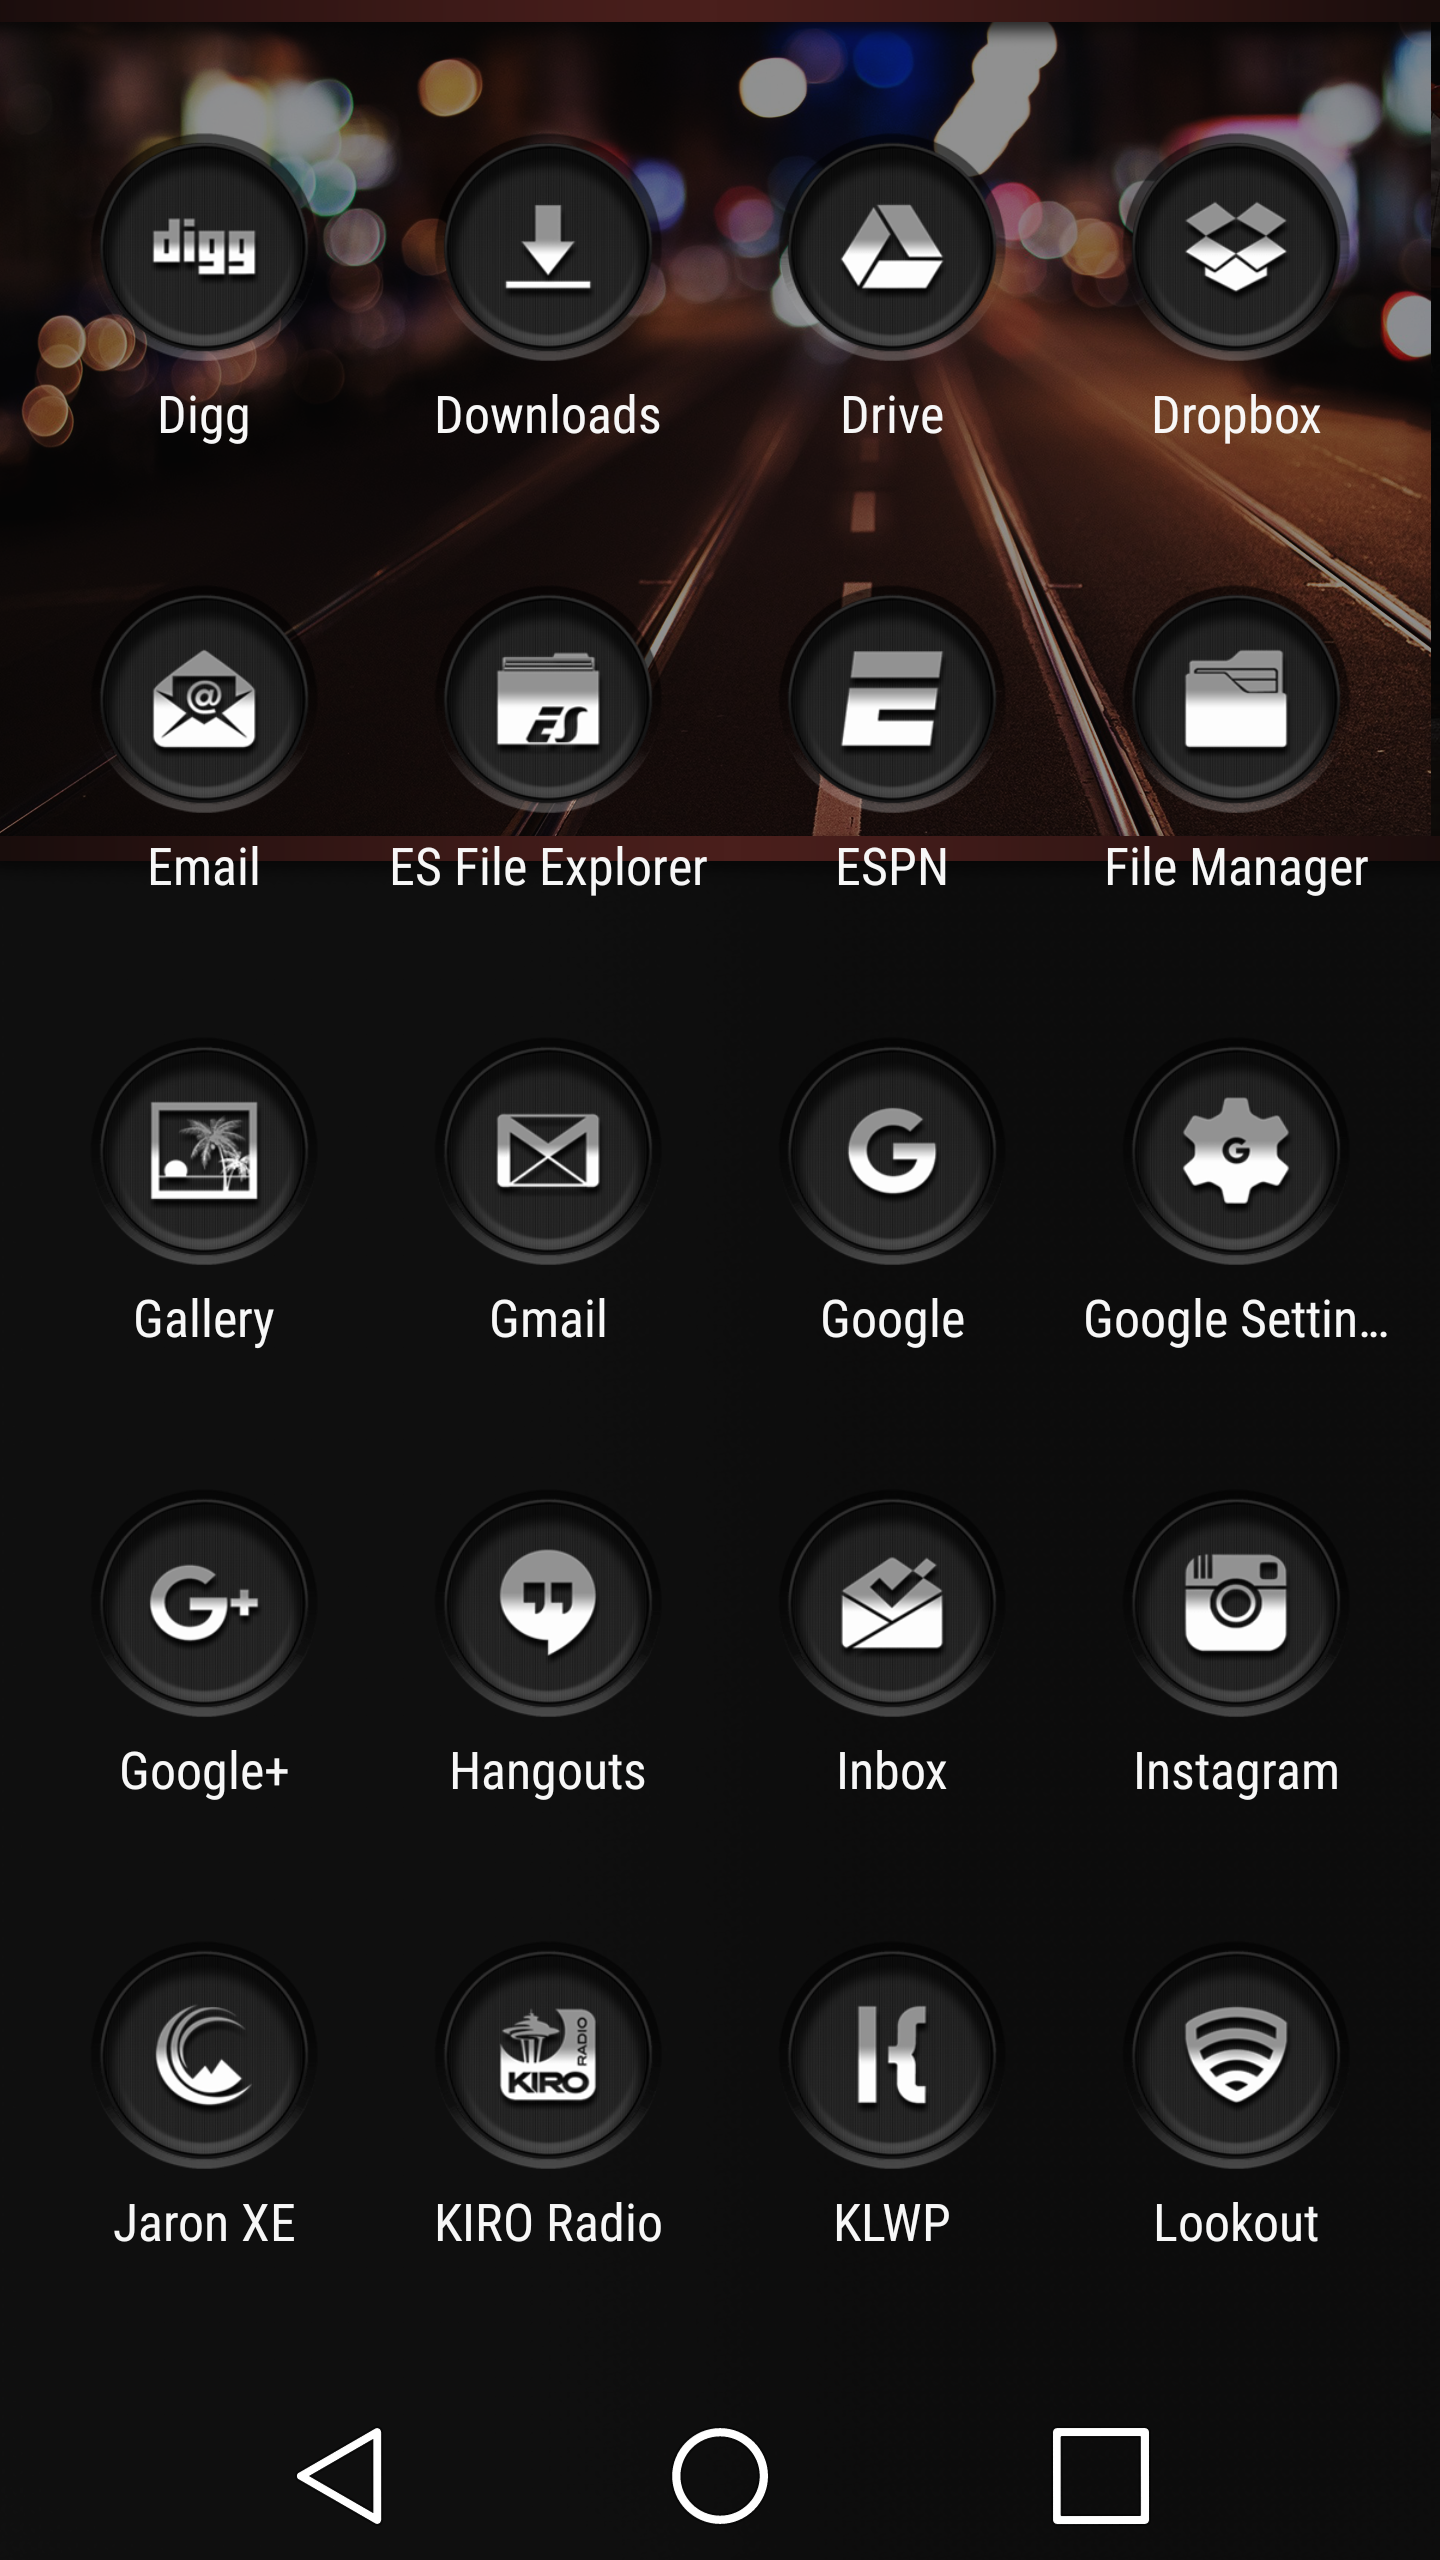 Android application Jaron XE - Icon Pack screenshort